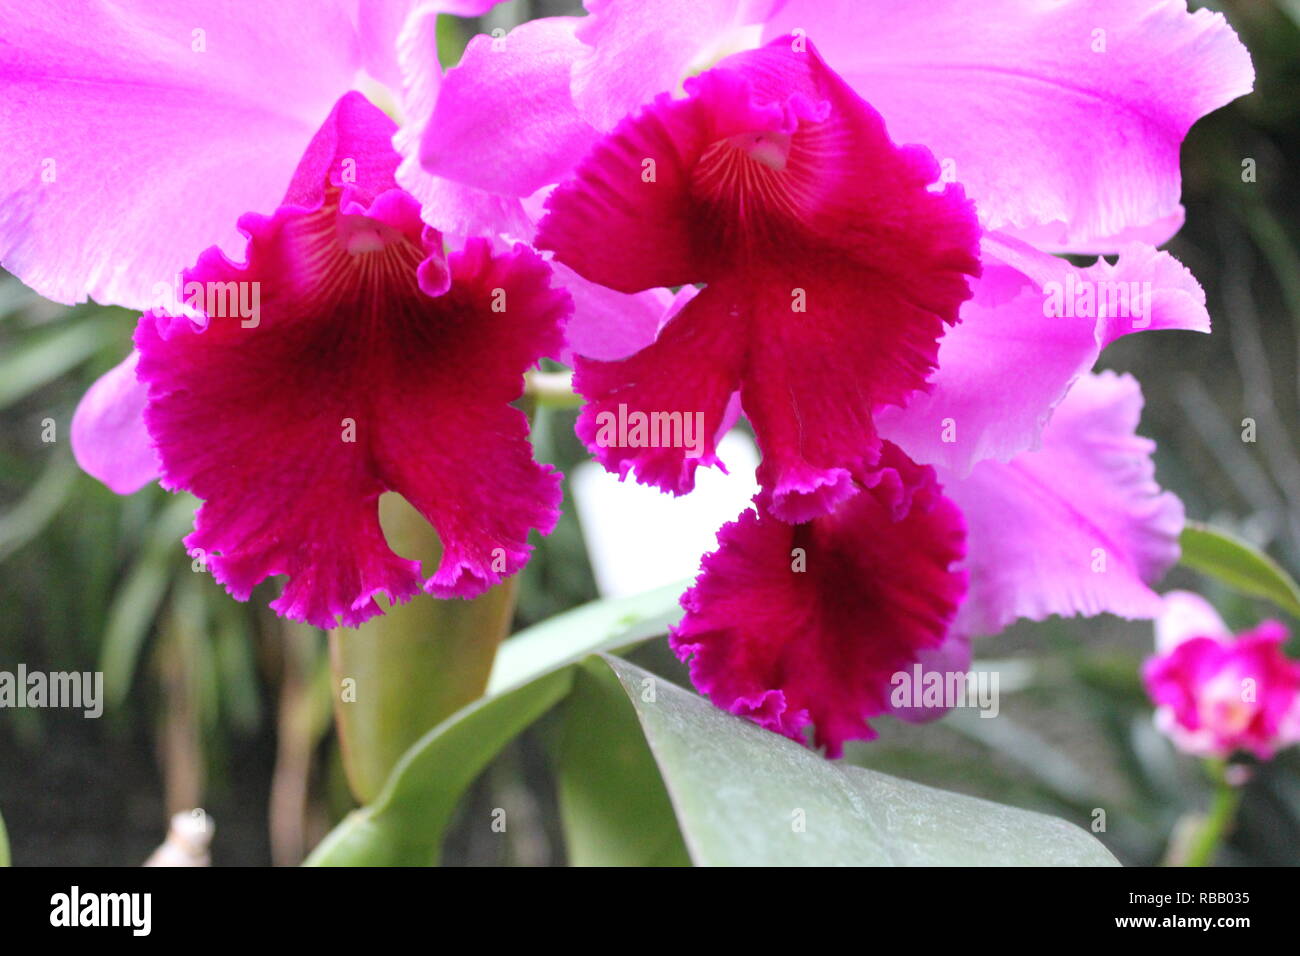 Hot pink and yellow Brassolaeliocattleya orchid, Queen of the Orchids, growing in the meadow. Stock Photo